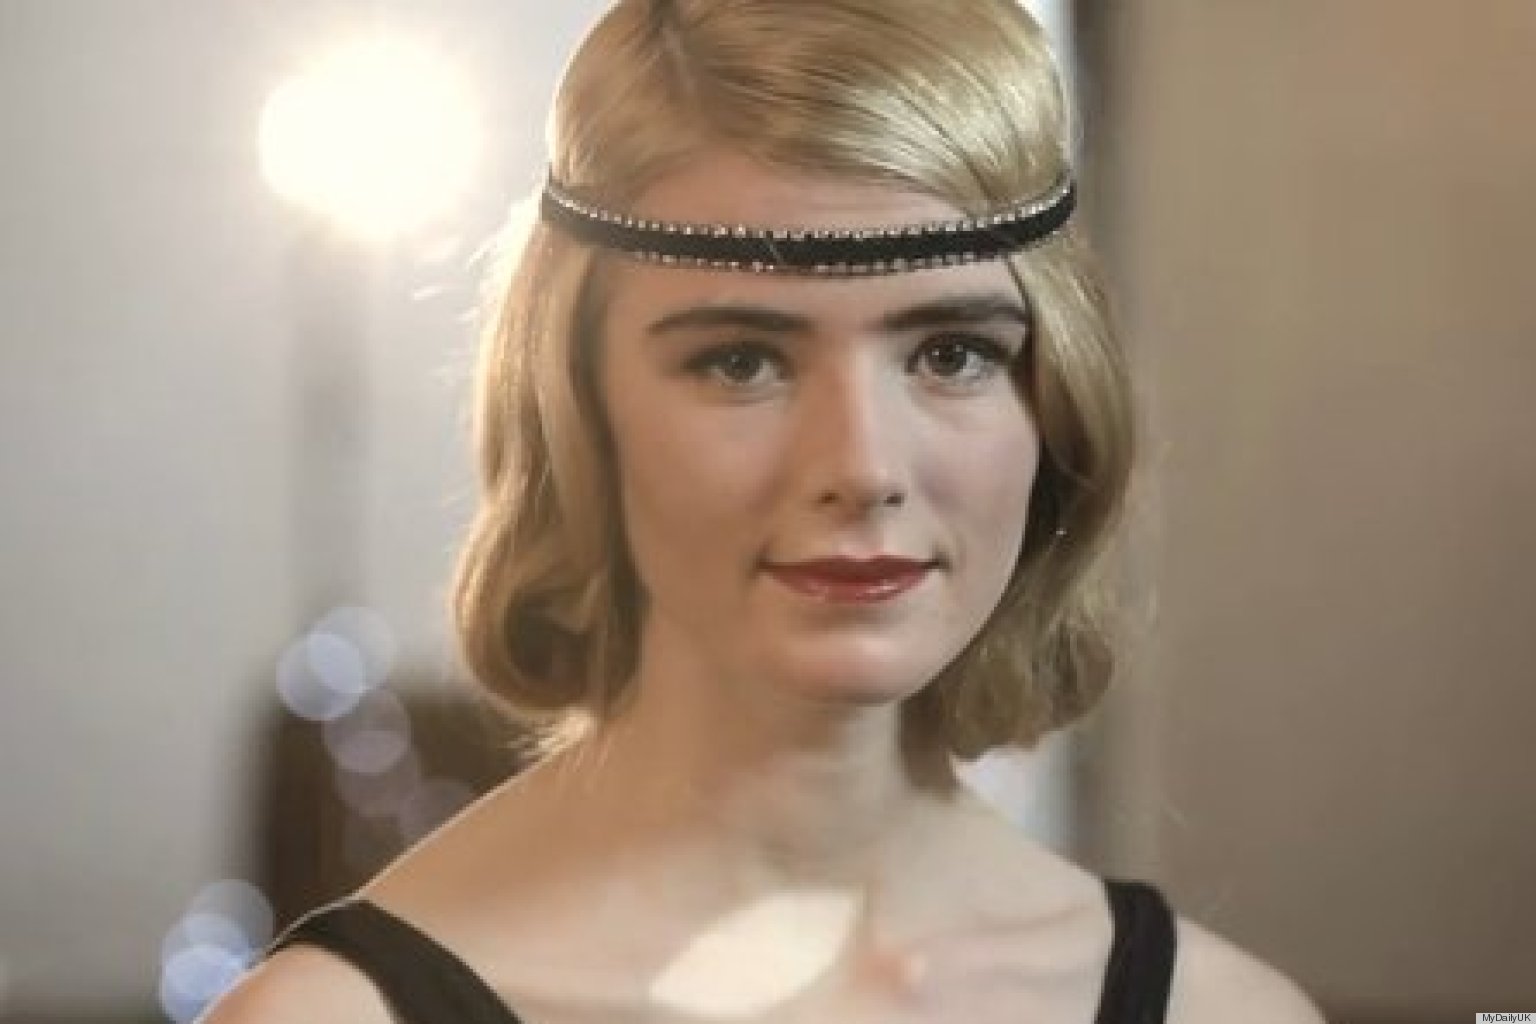 Flapper Girl Hair: How To Get A 1920s Waves Hairstyle (VIDEO) | HuffPost